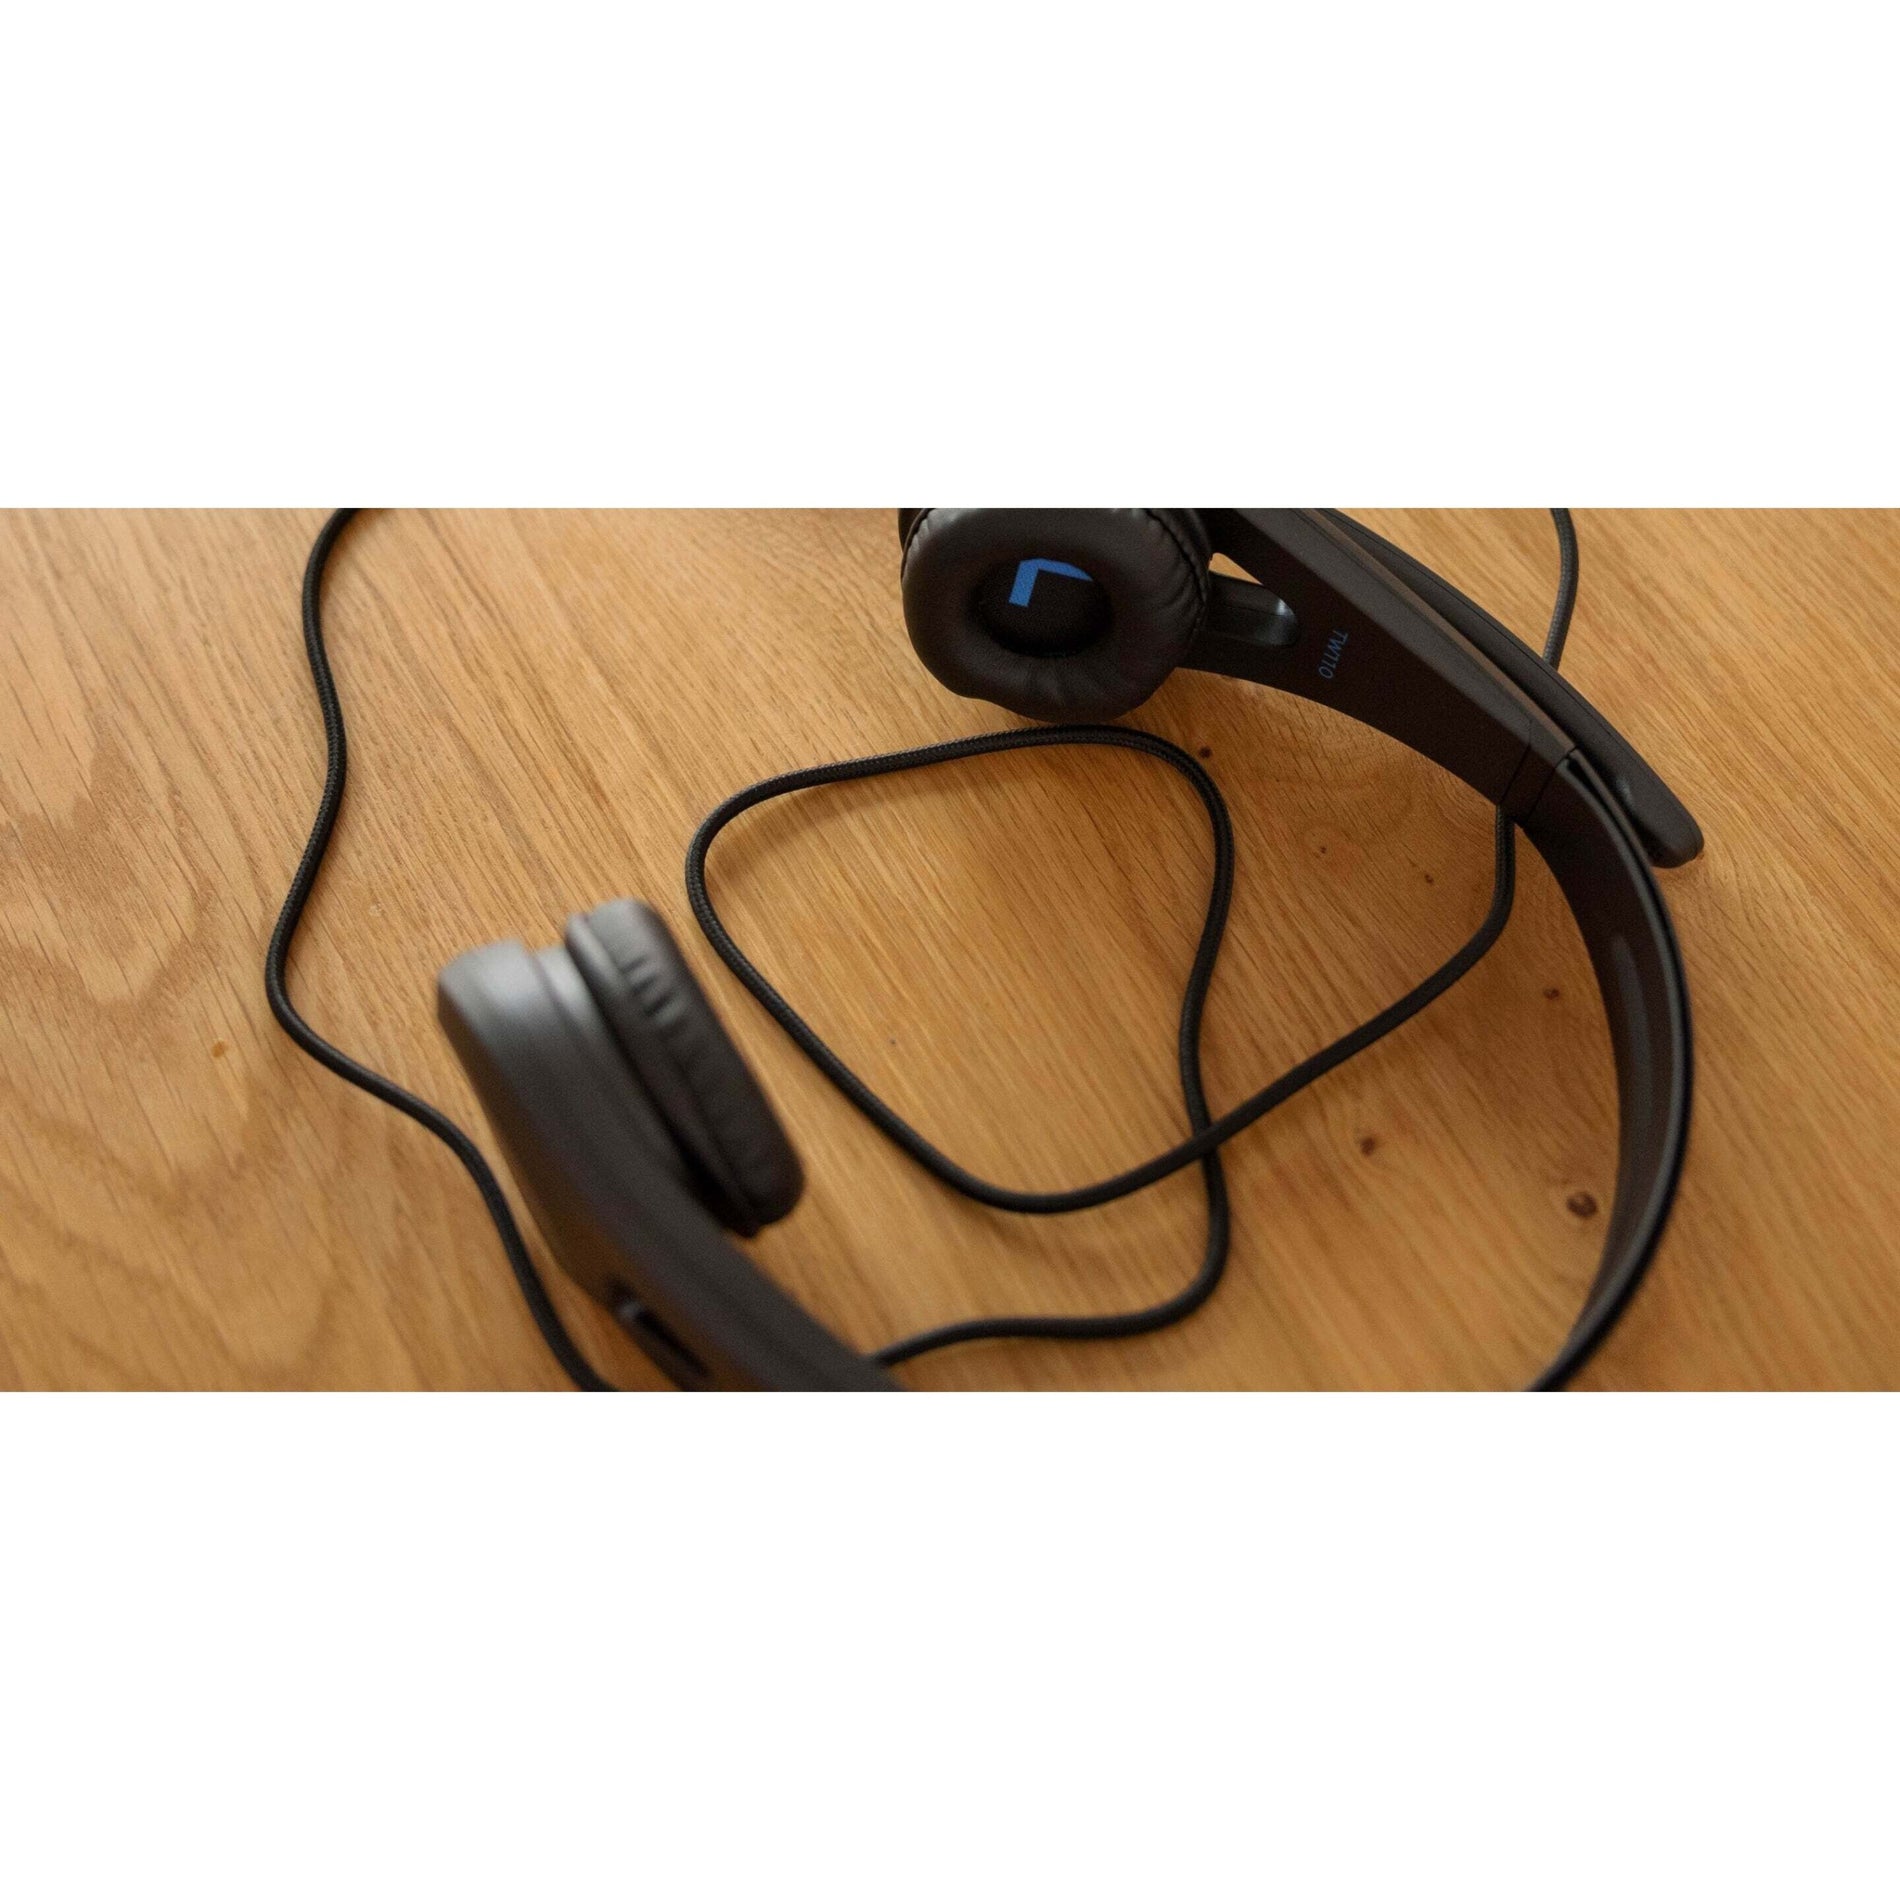 ThinkWrite TW120 ERGO Headset, USB Wired Binaural On-ear Headset for Office and Student Use